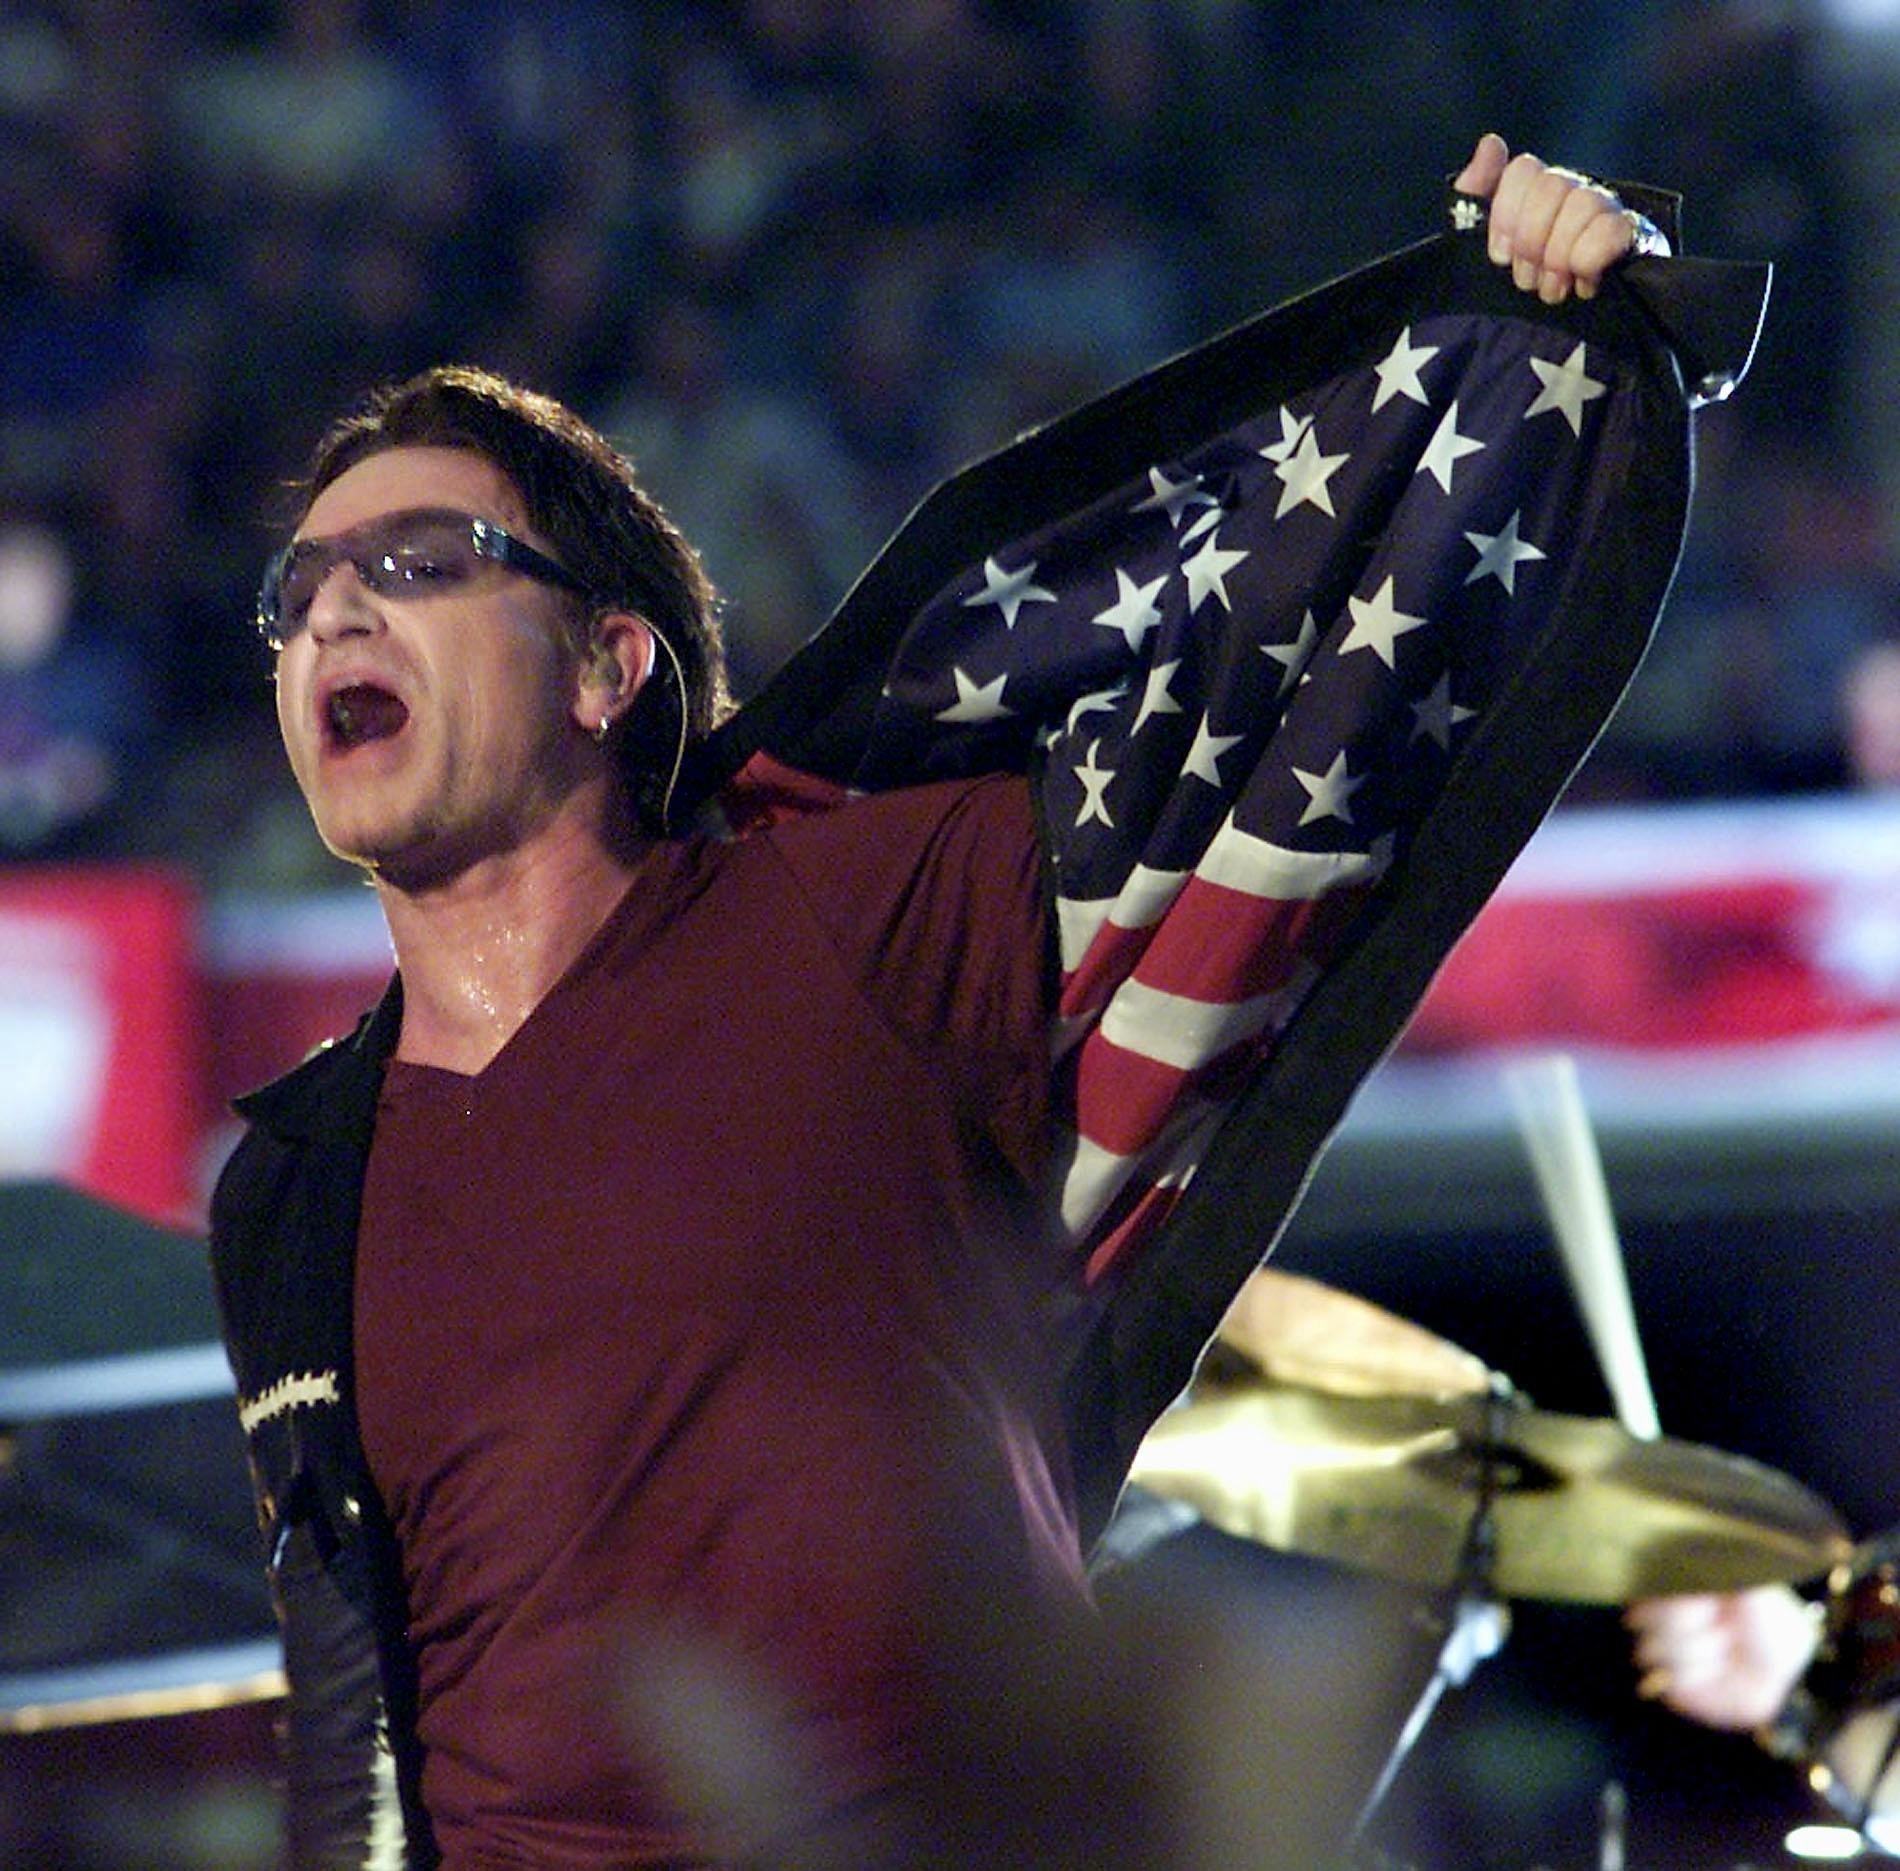 Bono, singer with the Irish rock group U2, opens his jacket exposing an American flag as he performs during halftime 03 February, 2002 of Super Bowl XXXVI